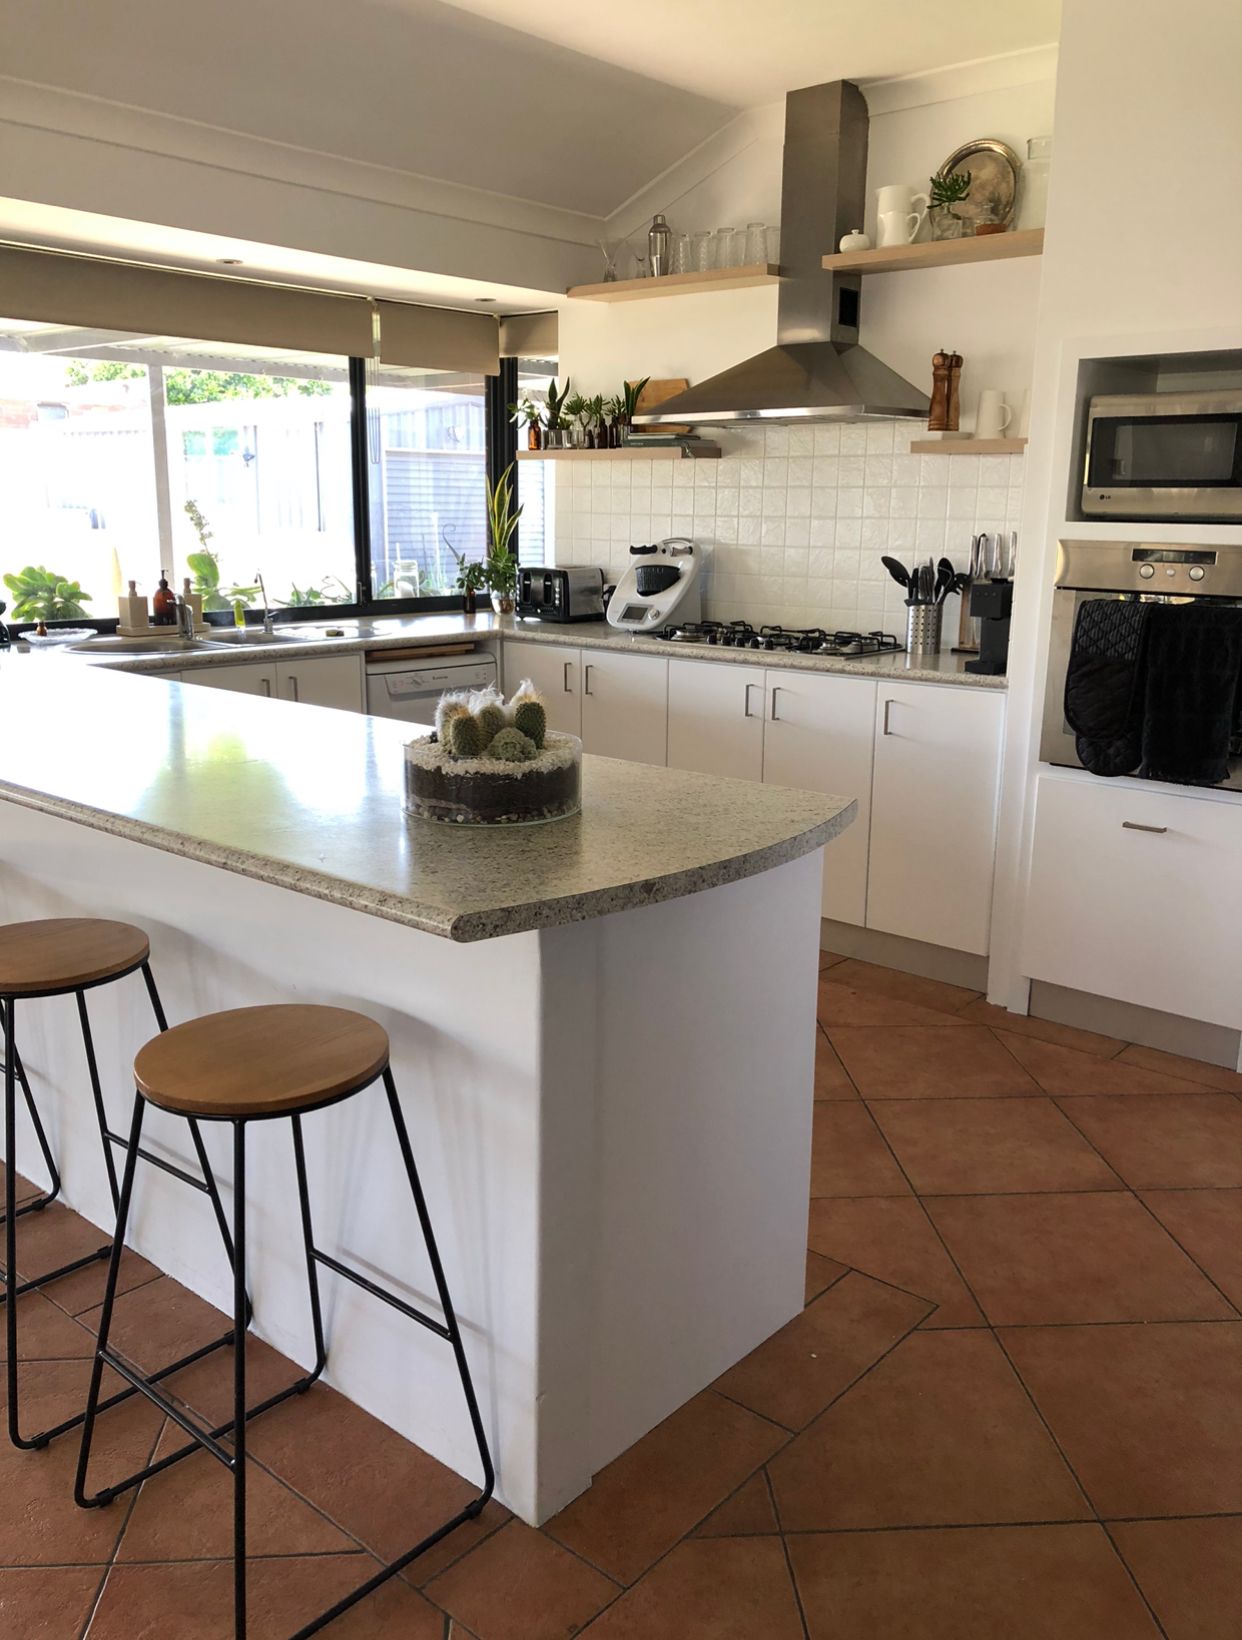 What should we do with this kitchen | Bunnings Workshop community